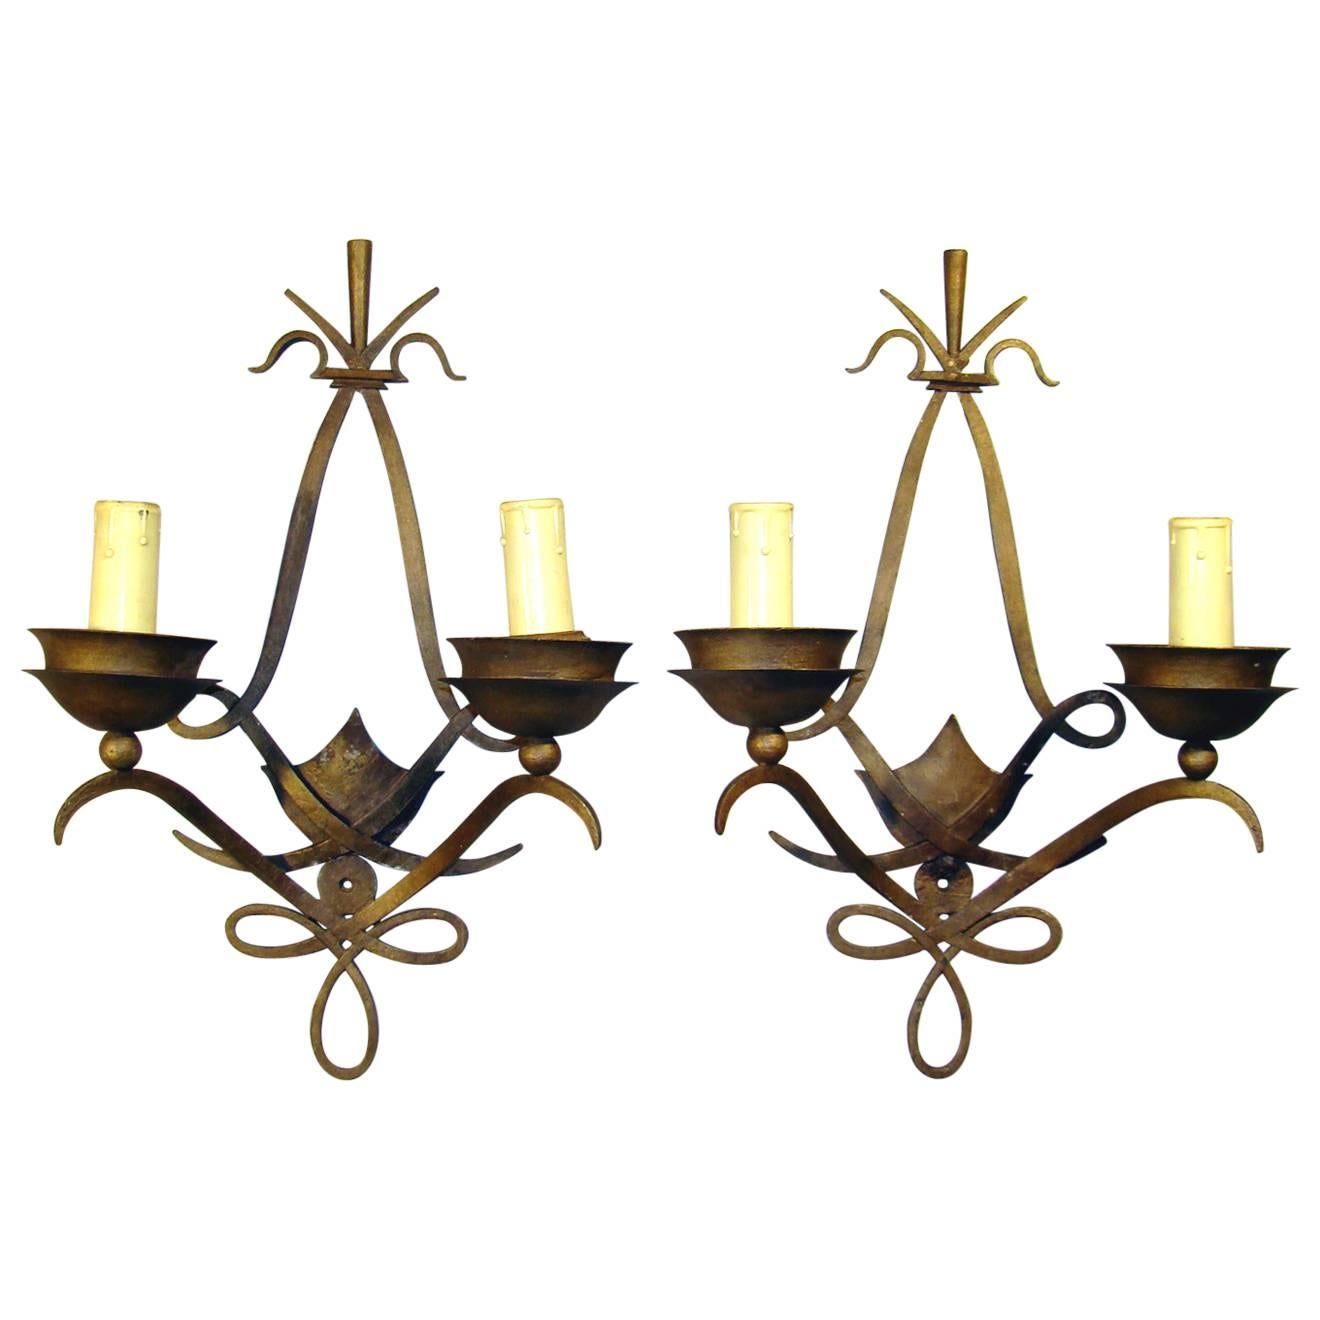 Pair of Art Deco Poillerat Style Wall Sconces, French, 1940s